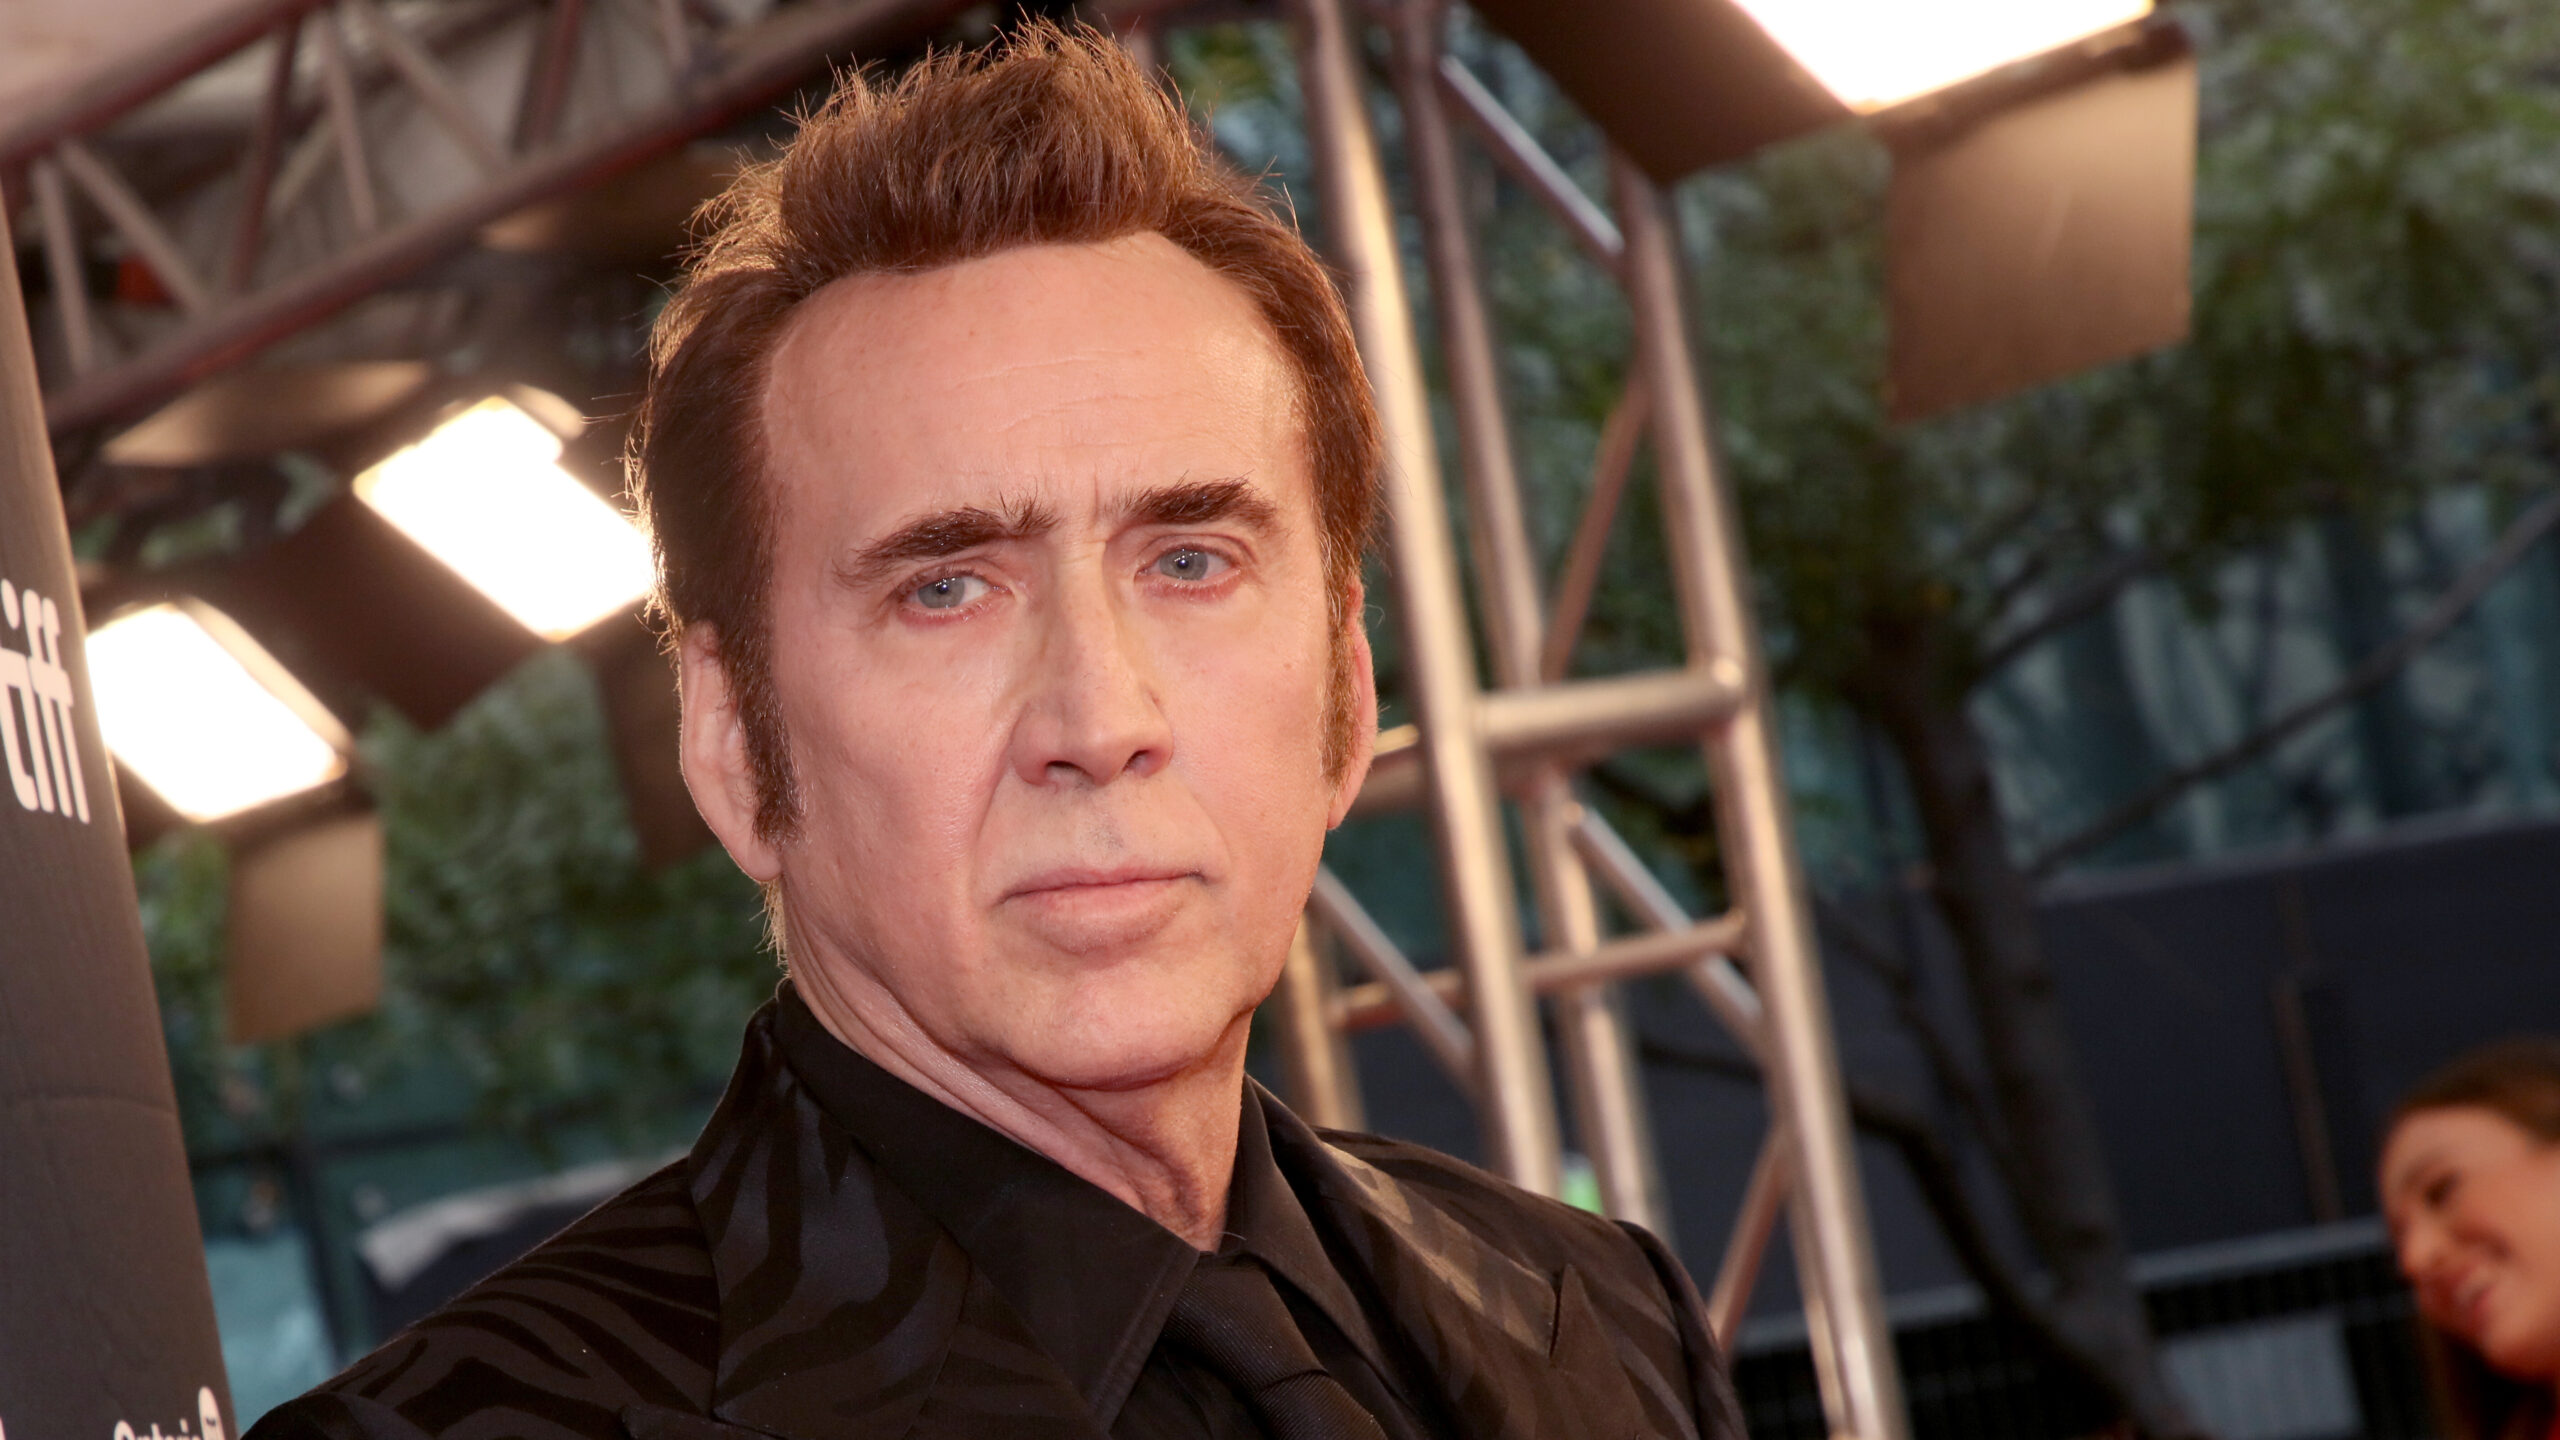 Forget Hollywood’s ‘old guard,’ Nicolas Cage says the young filmmakers get him